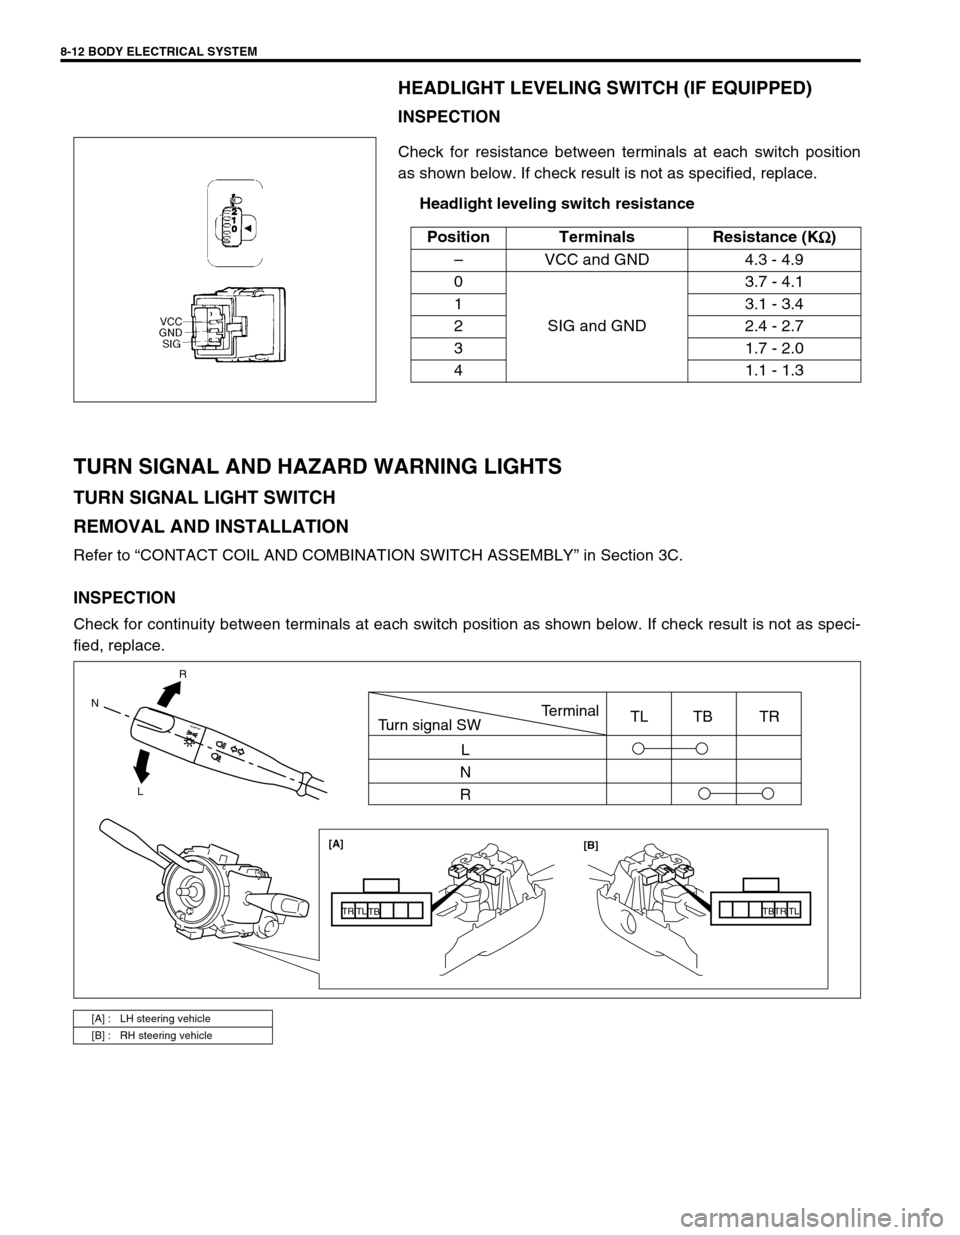 SUZUKI SWIFT 2000 1.G Transmission Service Workshop Manual 8-12 BODY ELECTRICAL SYSTEM
HEADLIGHT LEVELING SWITCH (IF EQUIPPED)
INSPECTION
Check for resistance between terminals at each switch position
as shown below. If check result is not as specified, repla